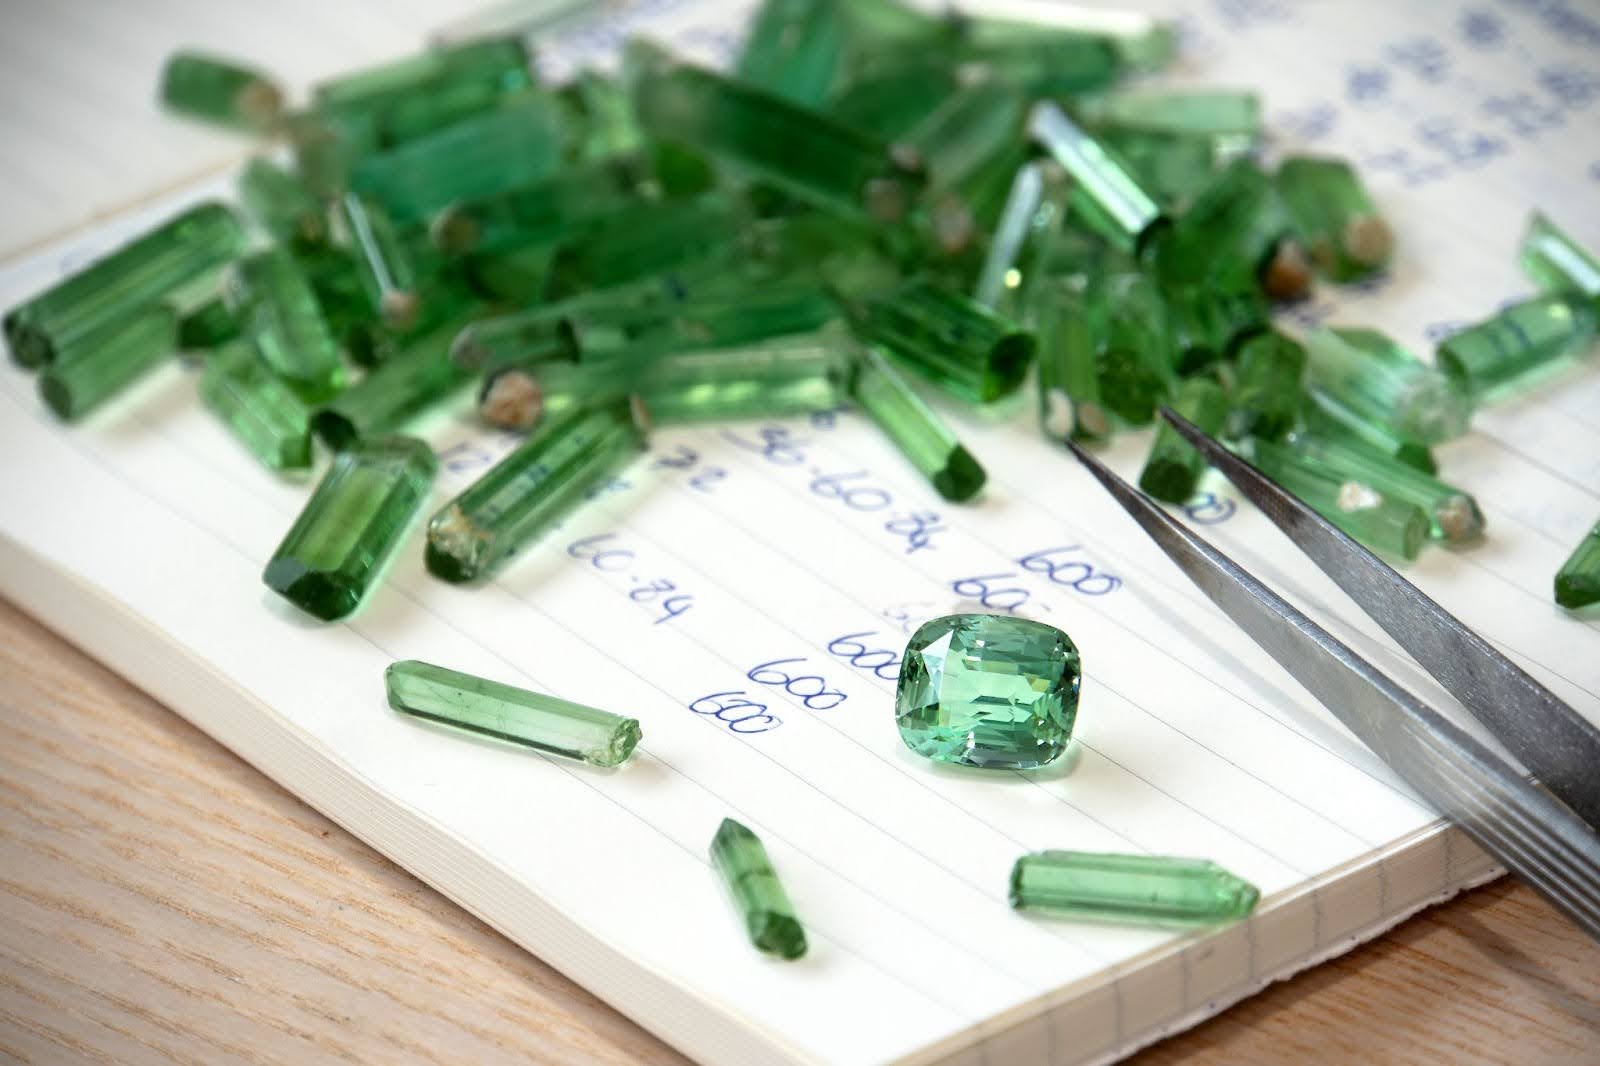  Green Tourmaline Roughs with a cut and polished Tourmaline Rectangle Cushion Gemstone on a notebook with Gemstone Tweezers at the corner